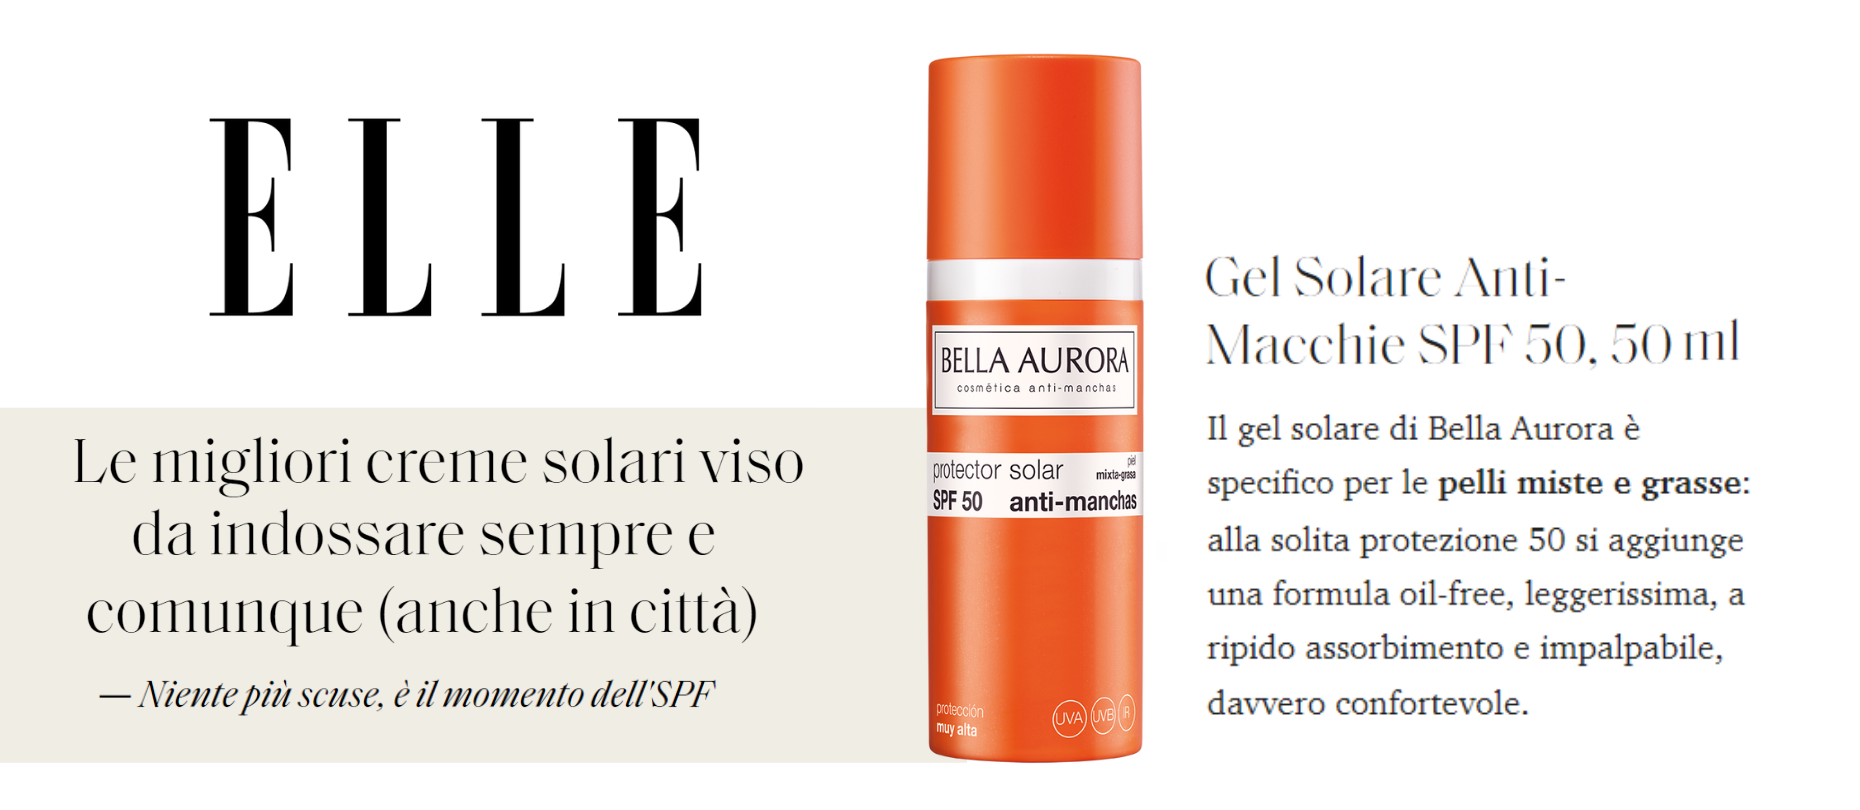 Elle Italy chooses Bella Aurora' sunscreens to be used every day of the year